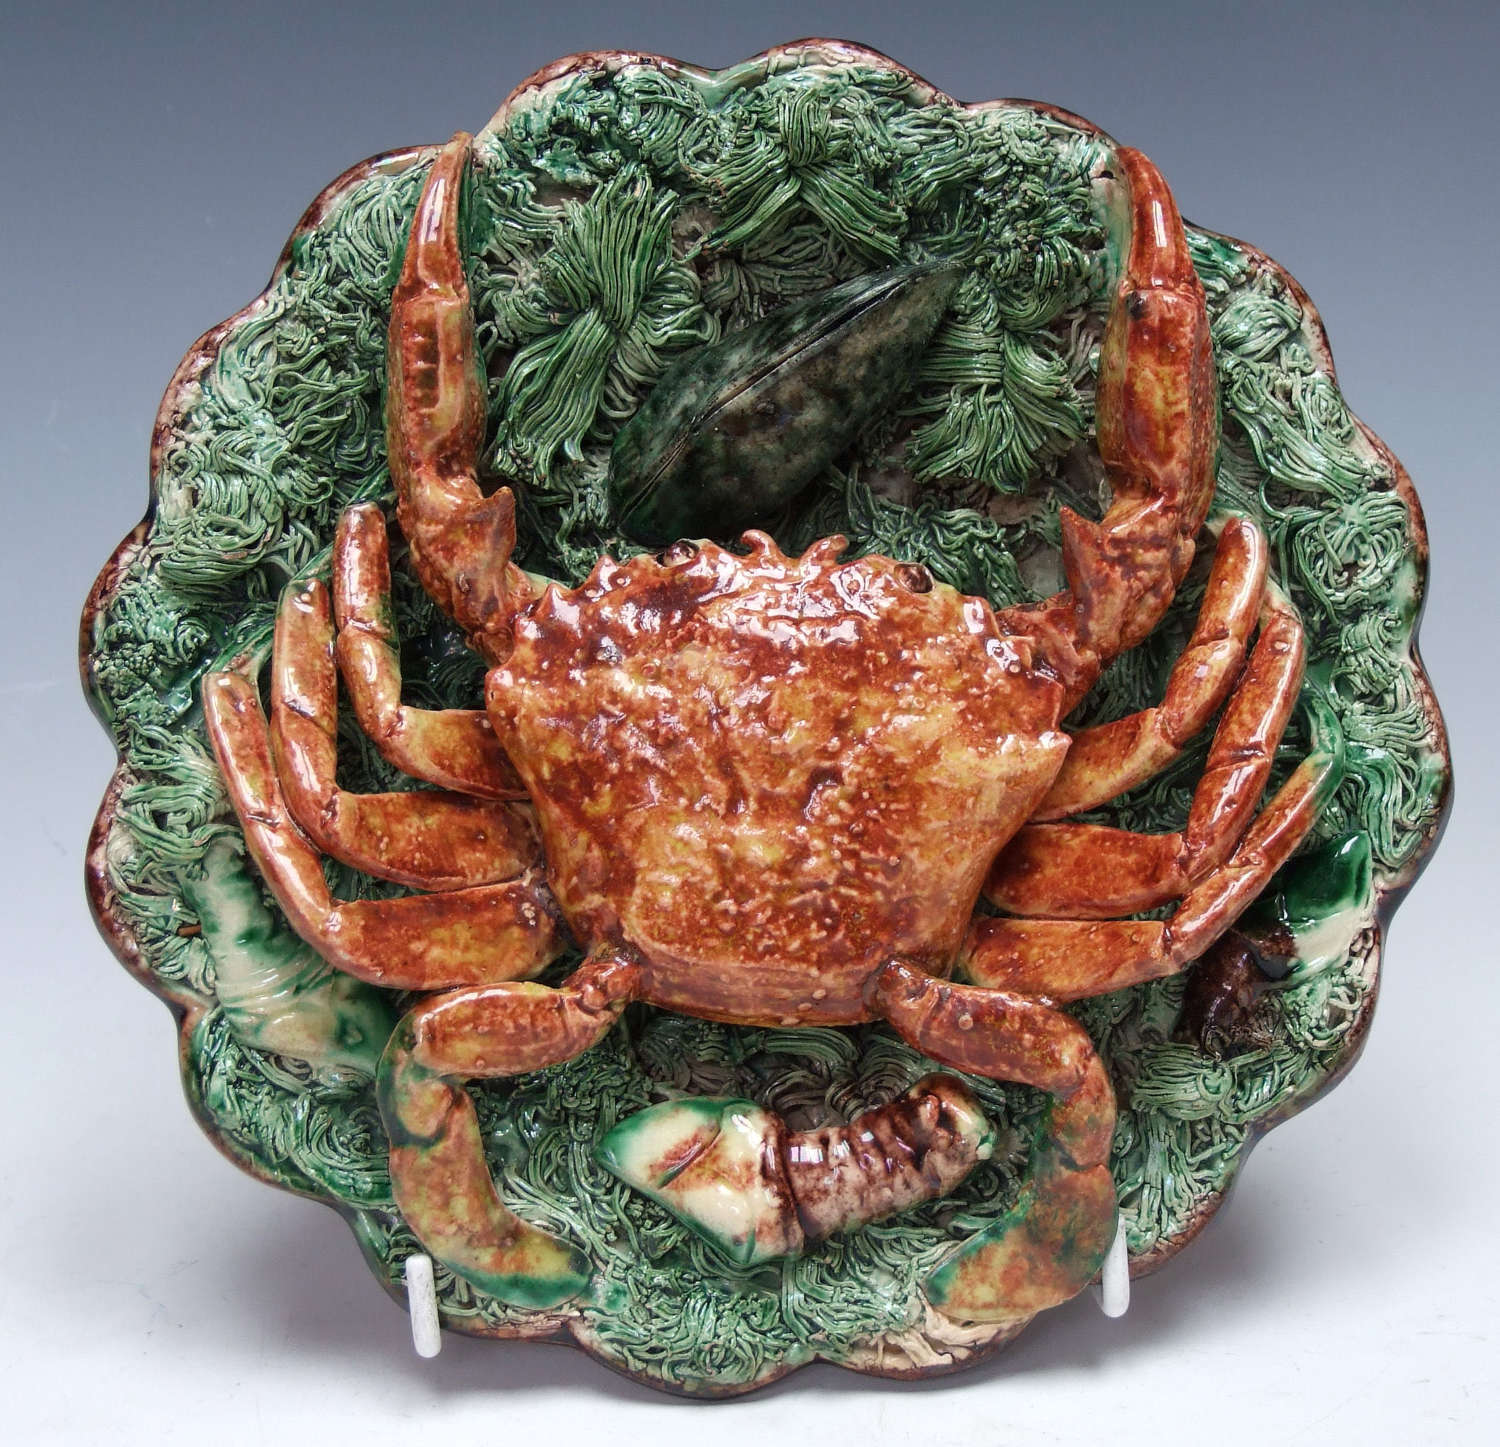 Fine Palissy crab plate by Jose Francisco de Sousa with scalloped edge